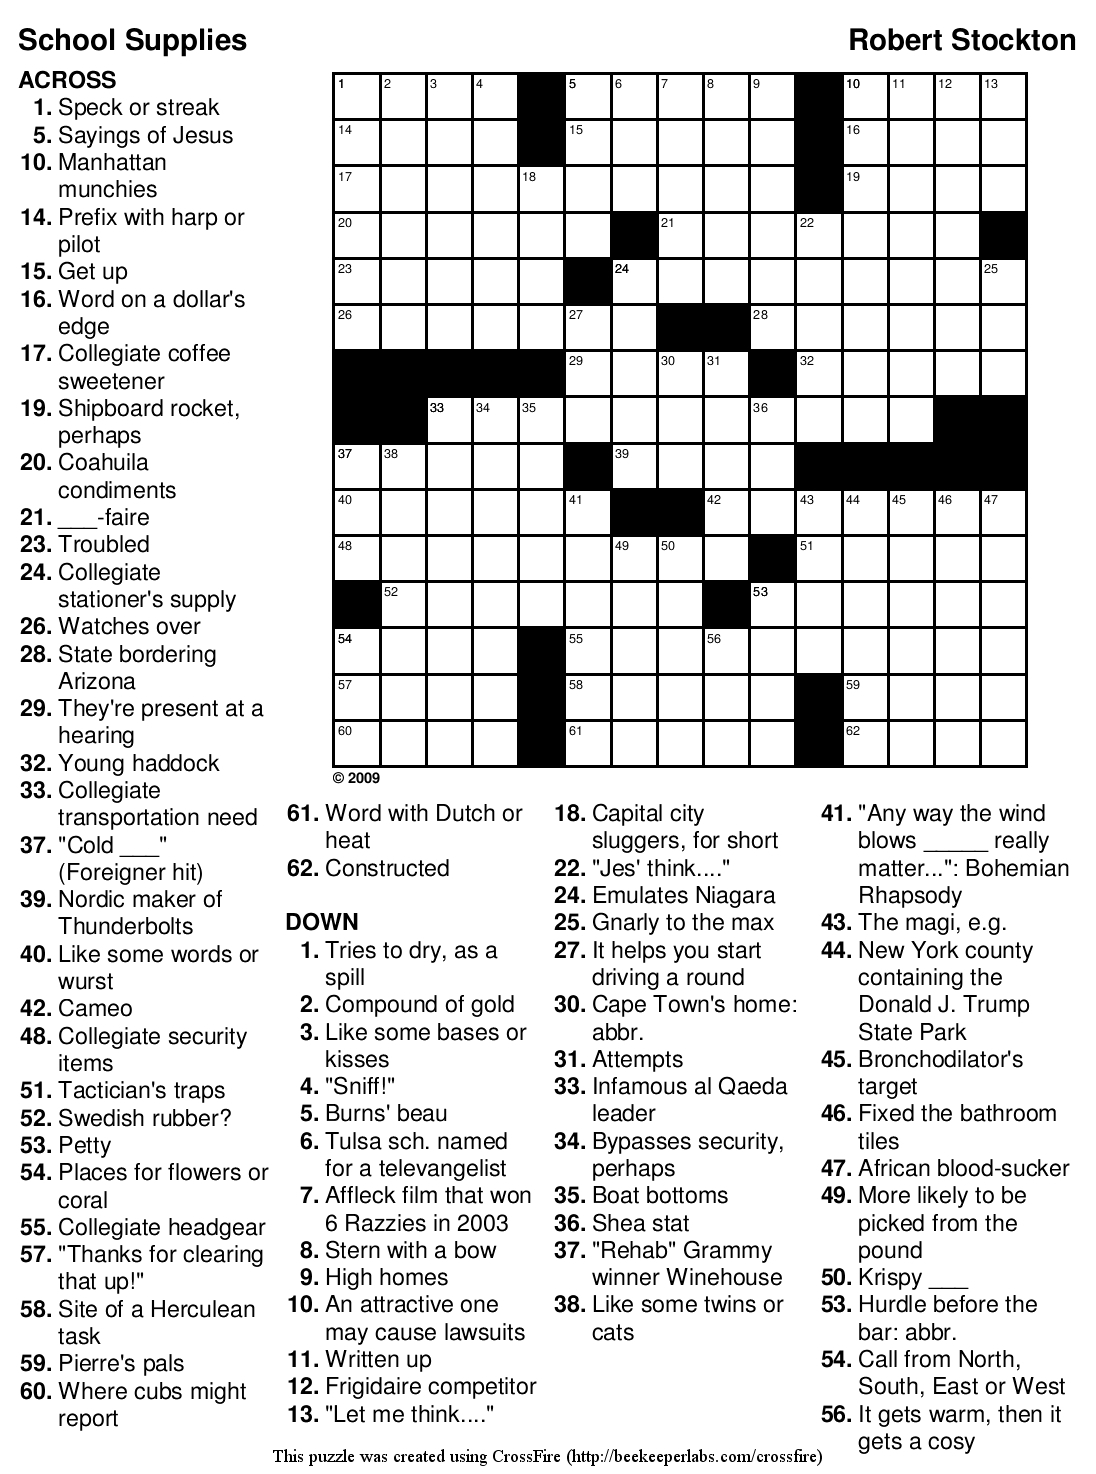 Printable Crosswords For Adults Free Printable Crossword Puzzles - Printable Crossword Puzzles For Adults